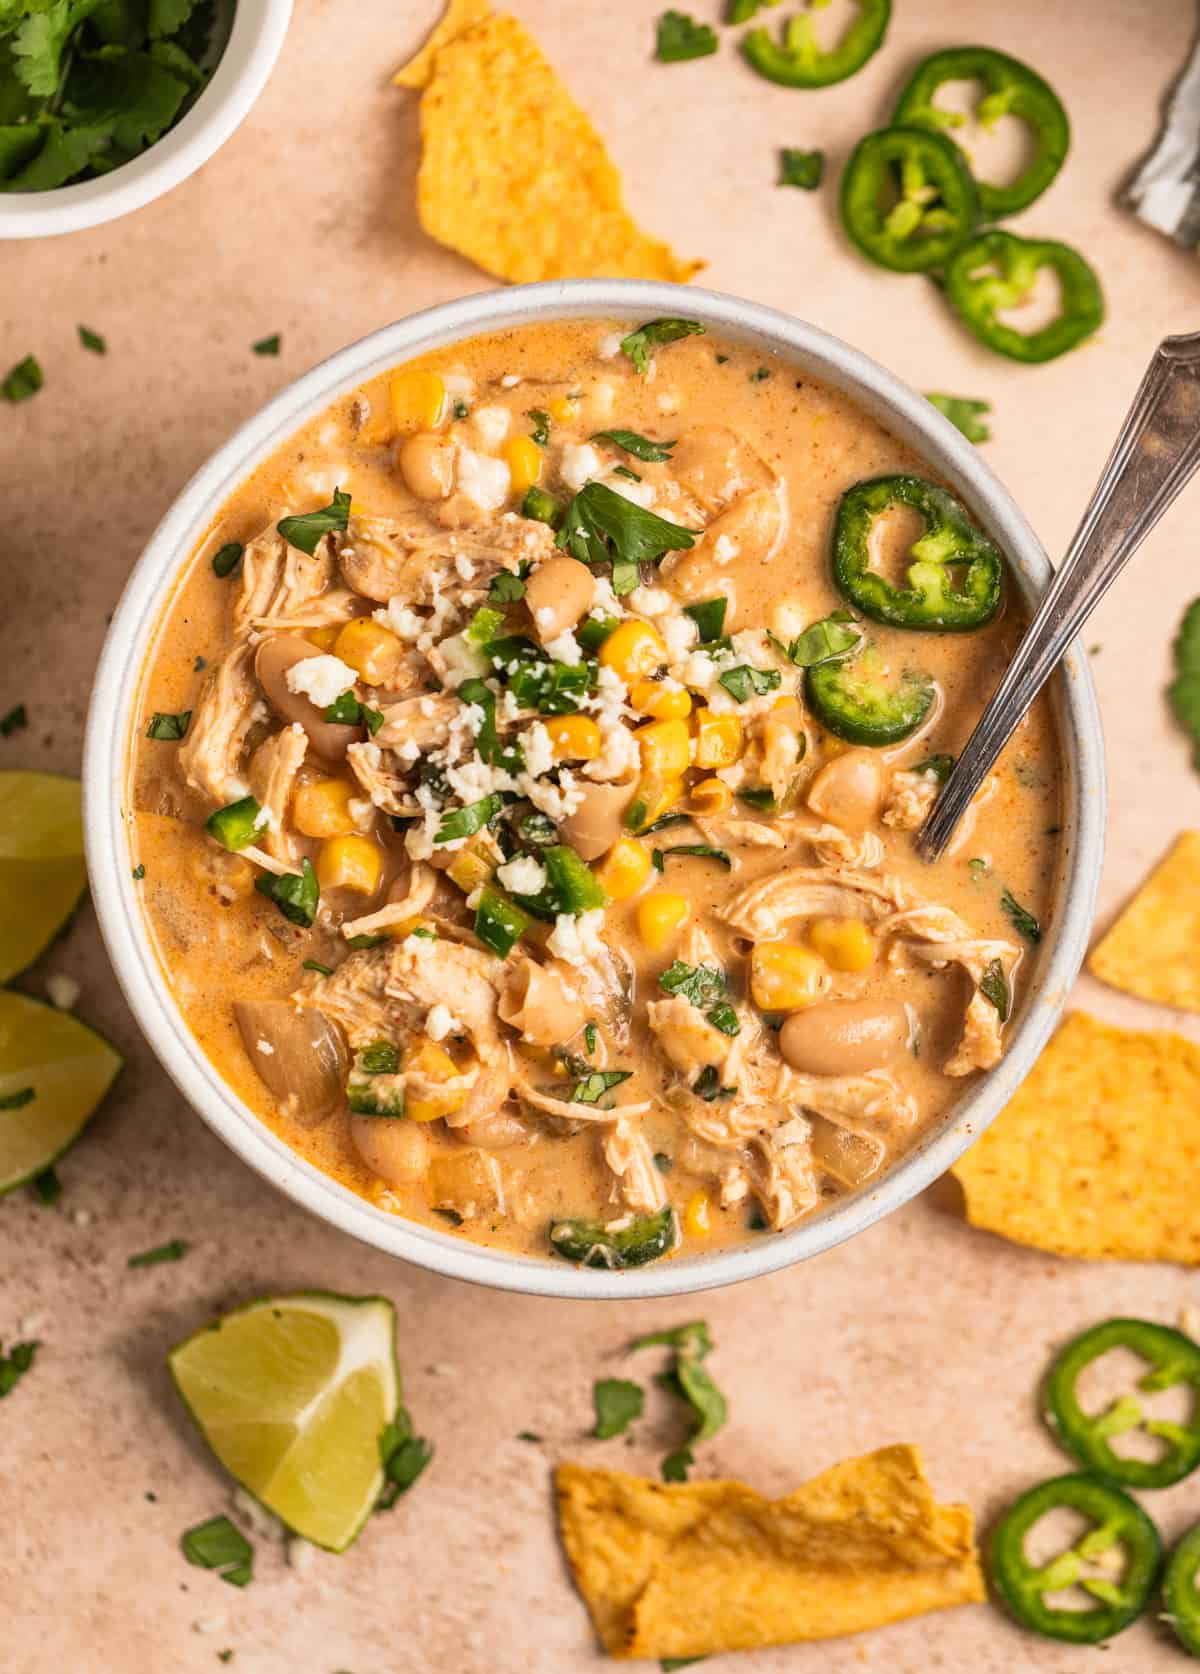 White Chicken Chili with Cream Cheese - Serving Dumplings